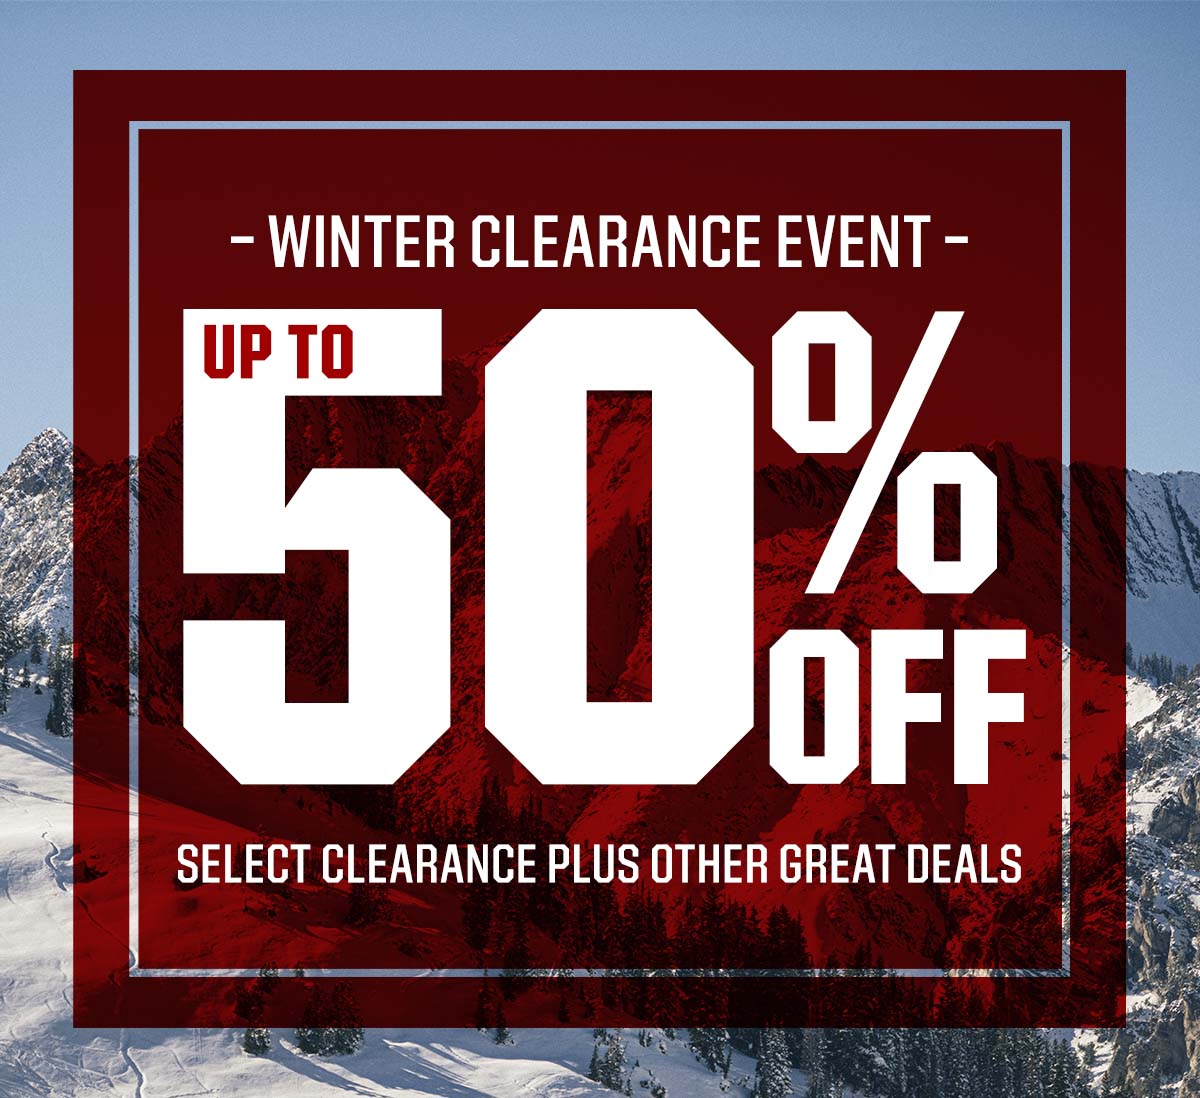 Winter clearance event. Up to 50% off select clearance plus other great deals.